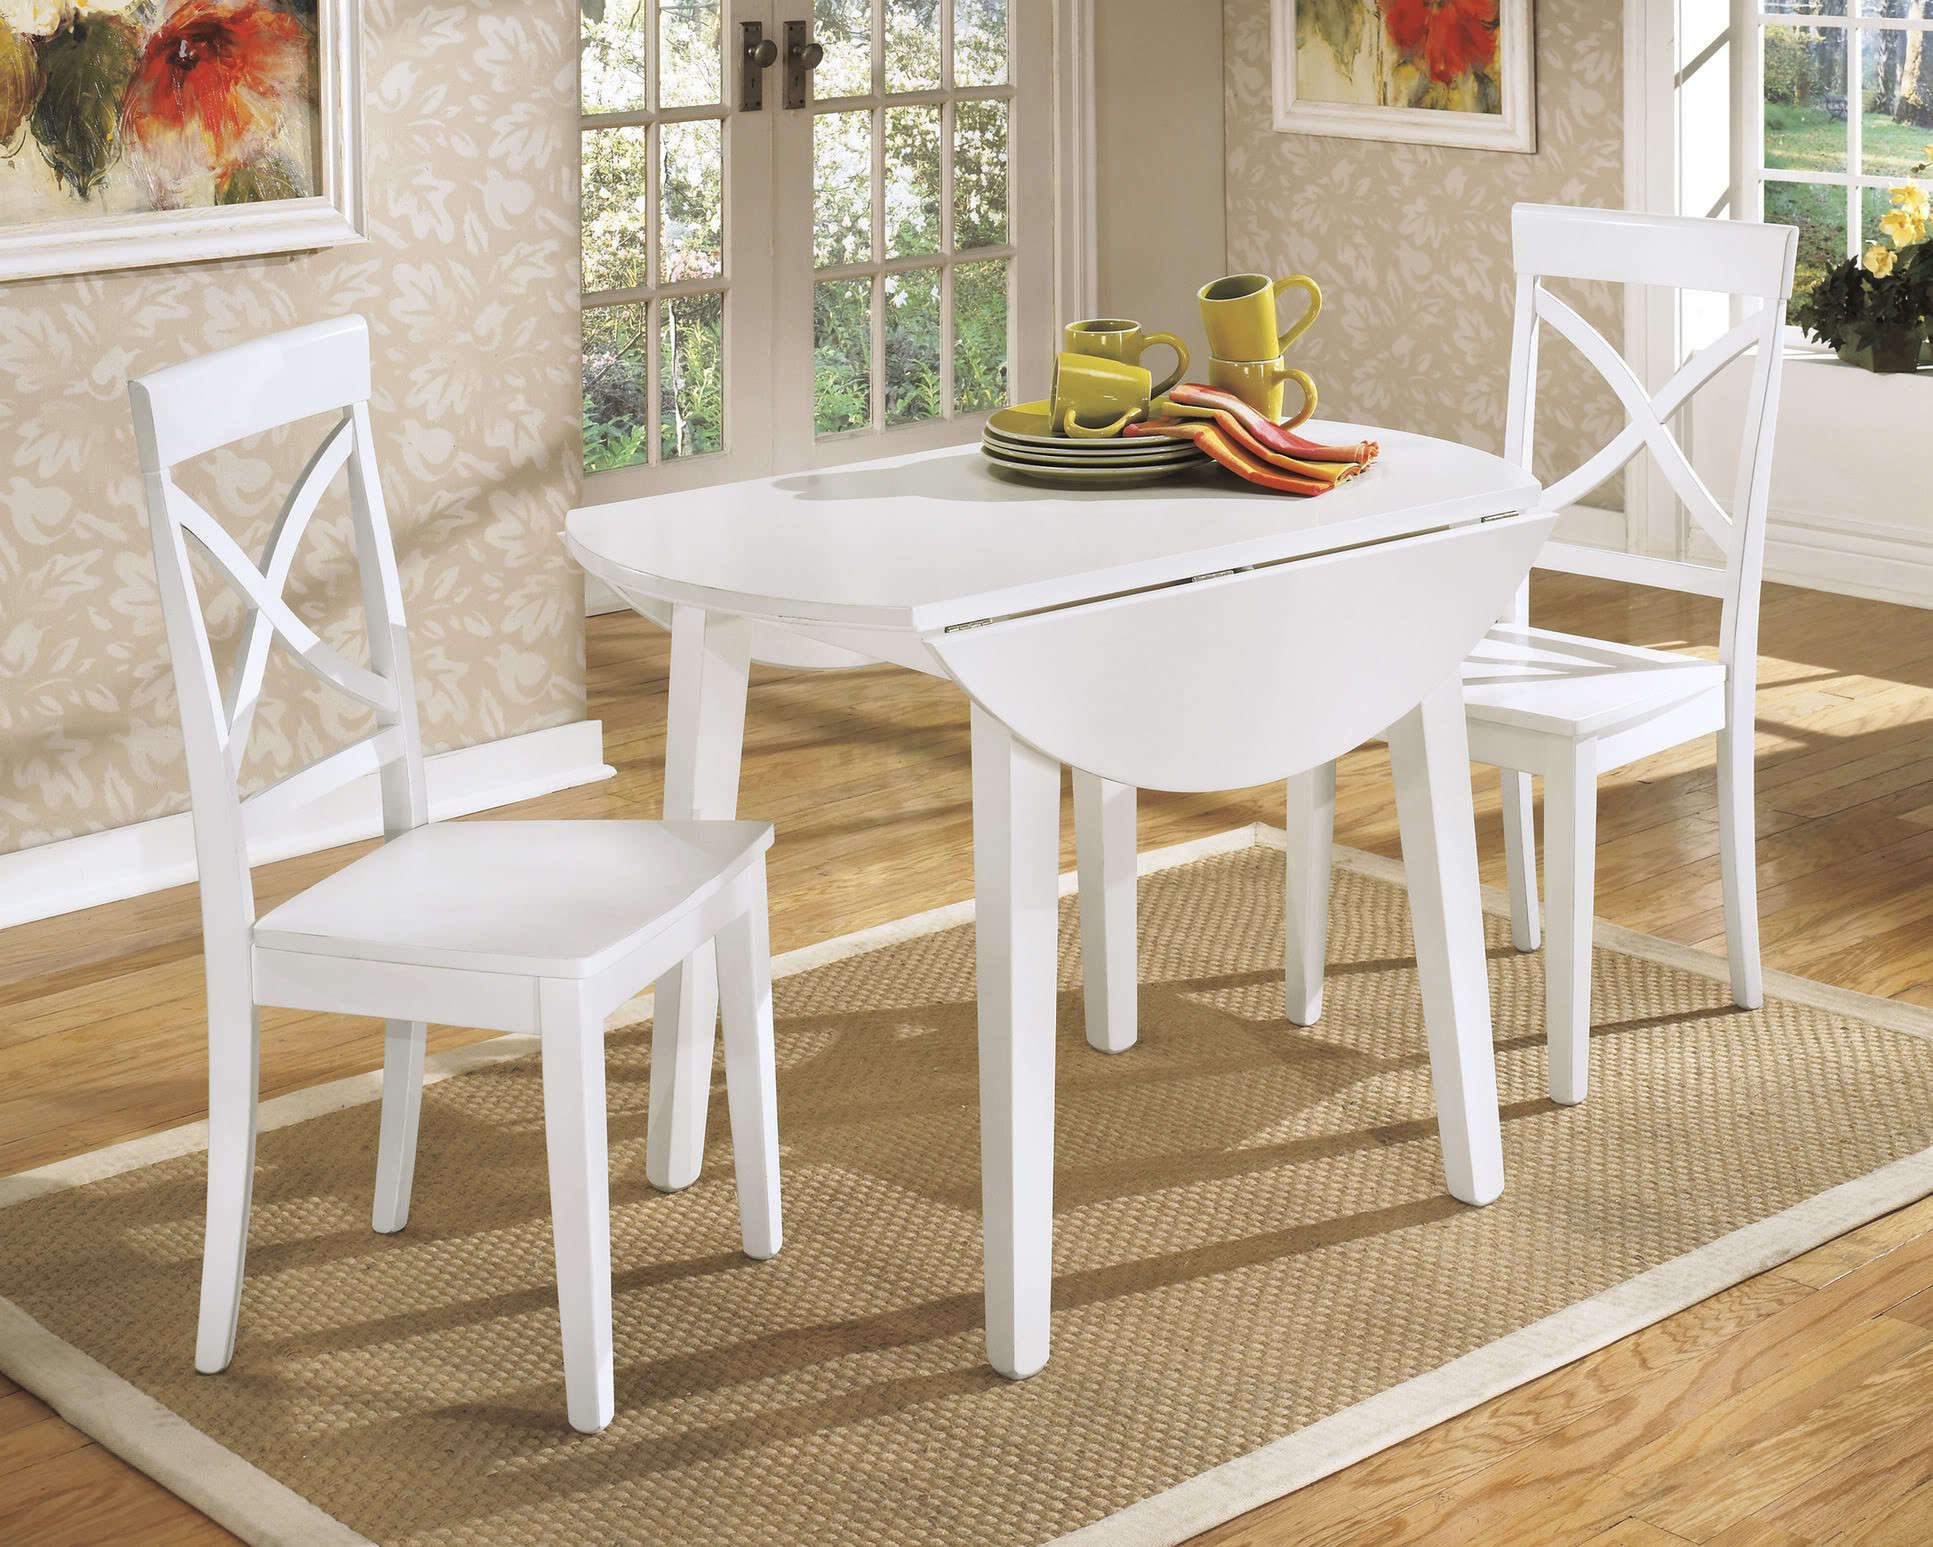 Small Round Kitchen Table Sets
 White Round Kitchen Table and Chairs Design – HomesFeed